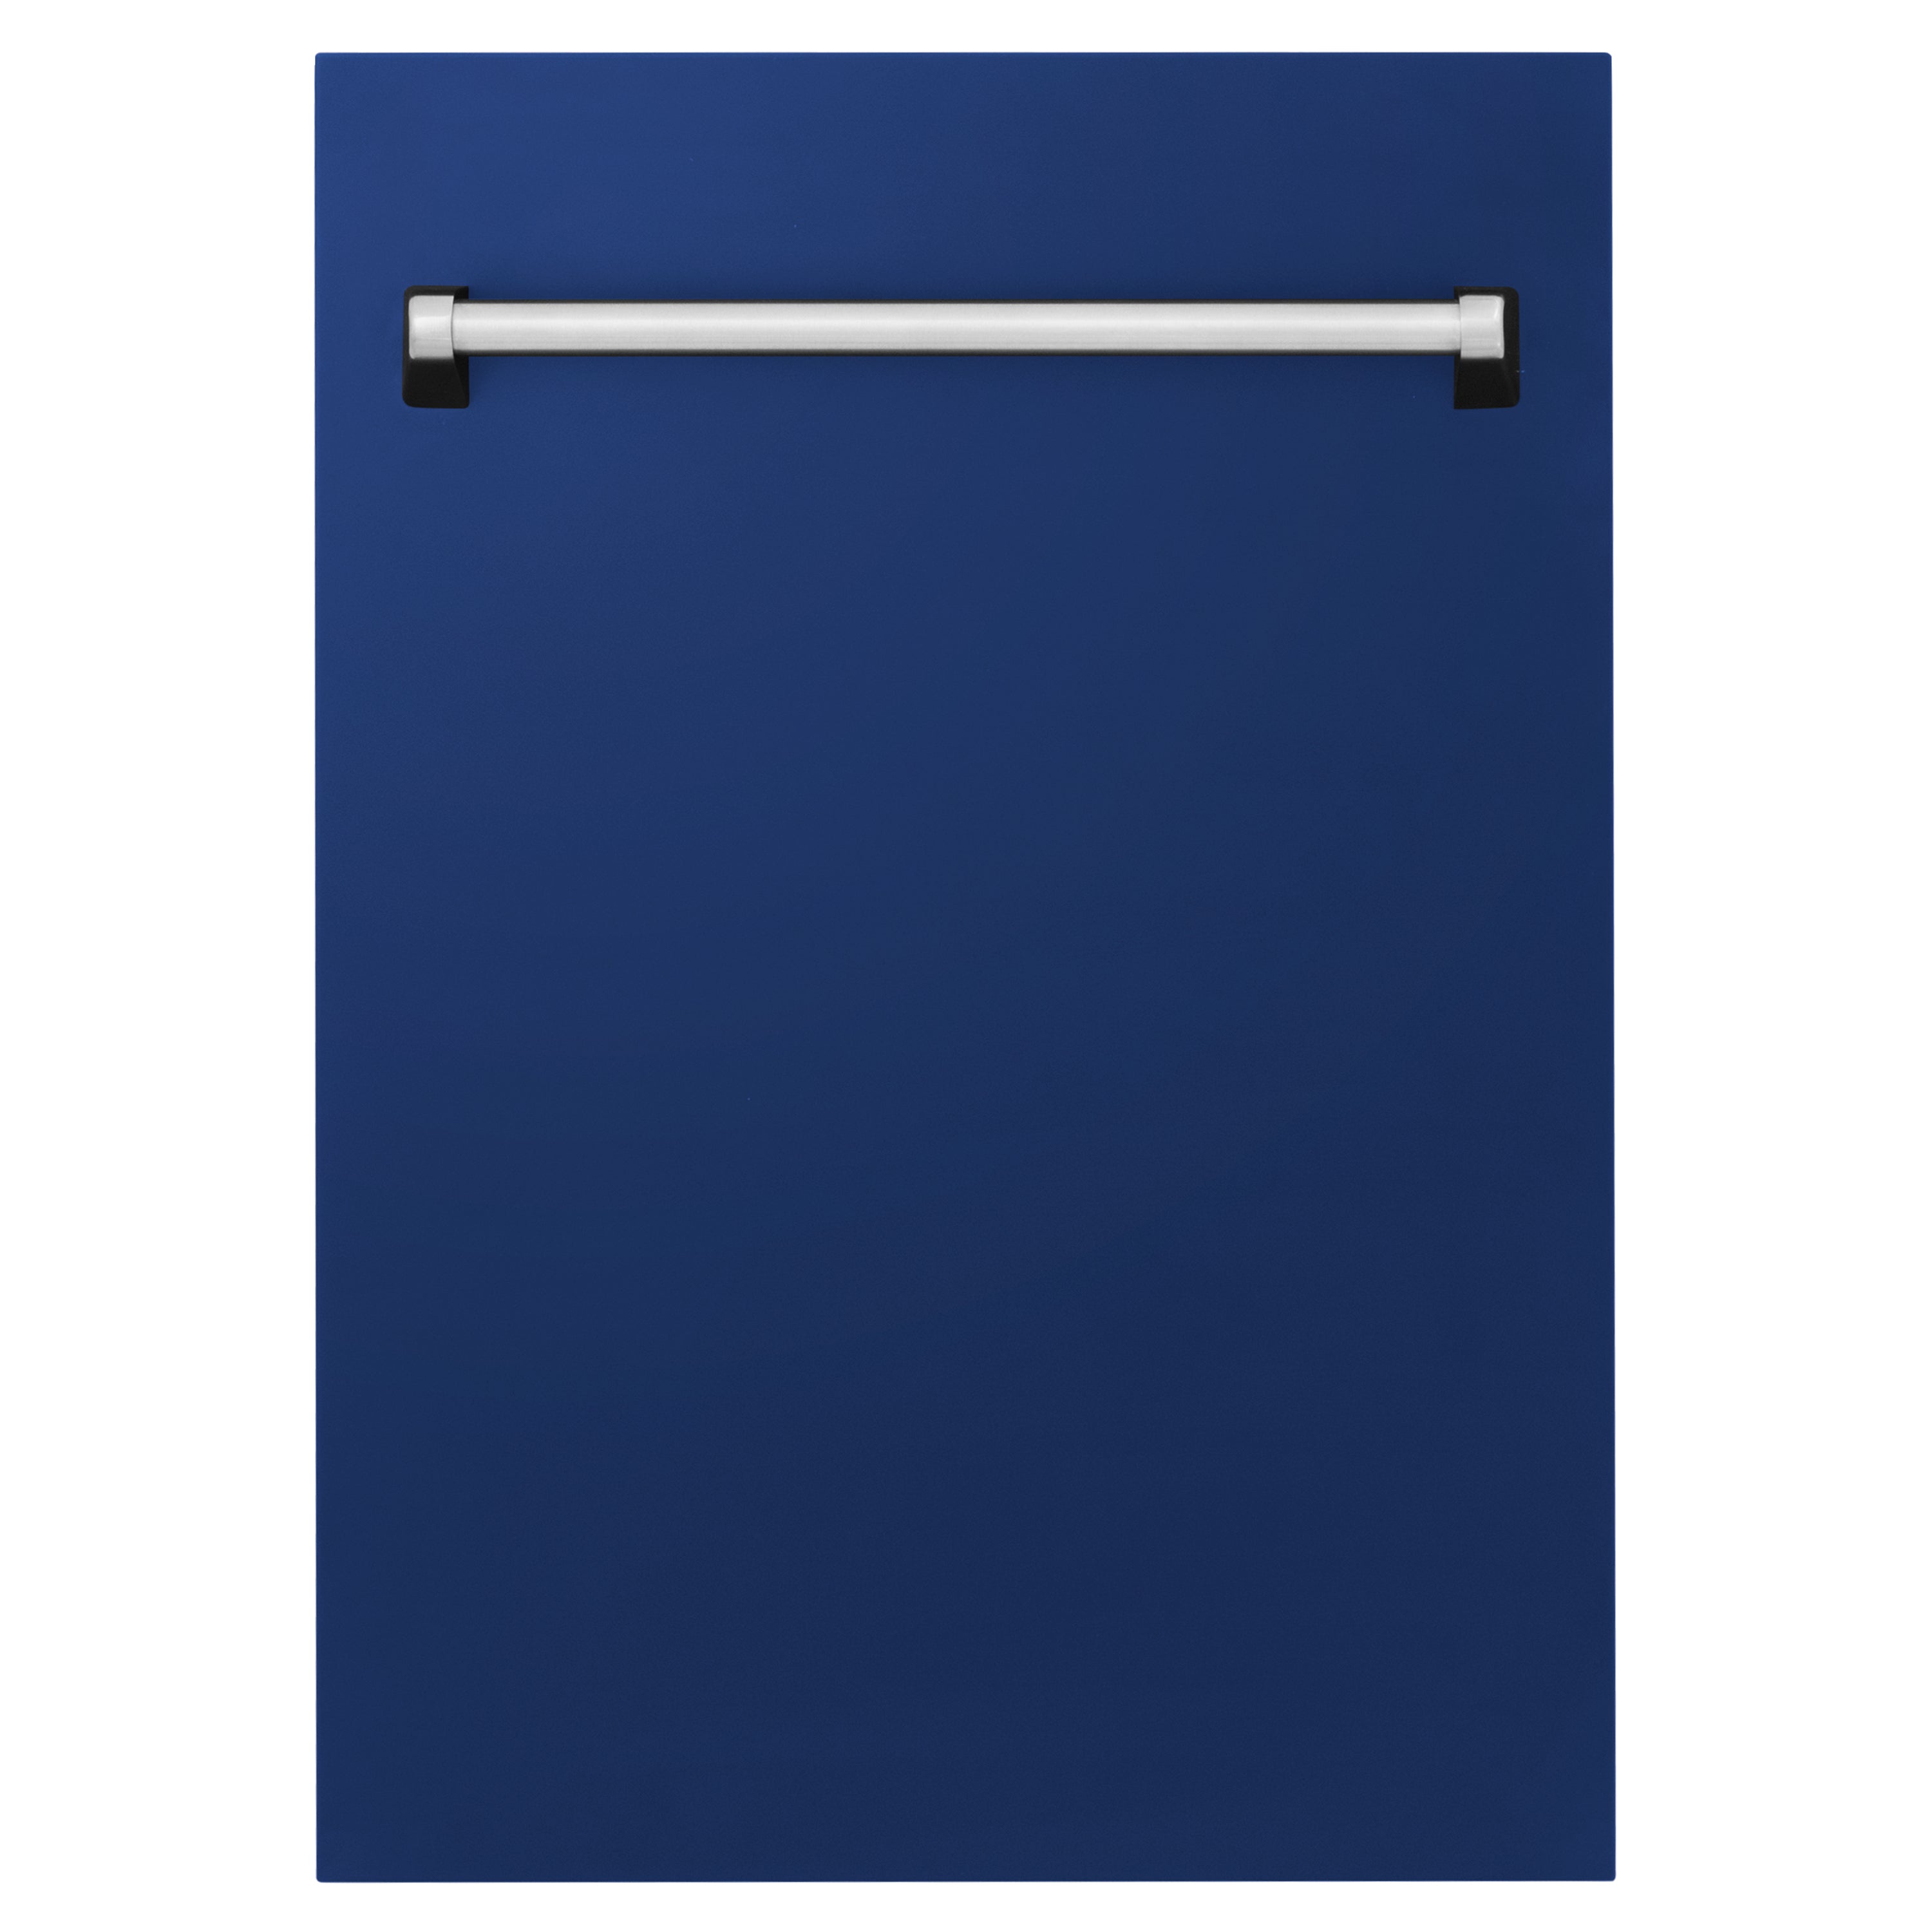 ZLINE 18" Tallac Dishwasher Panel in Blue Gloss with Traditional Handle (DPV-BG-18)